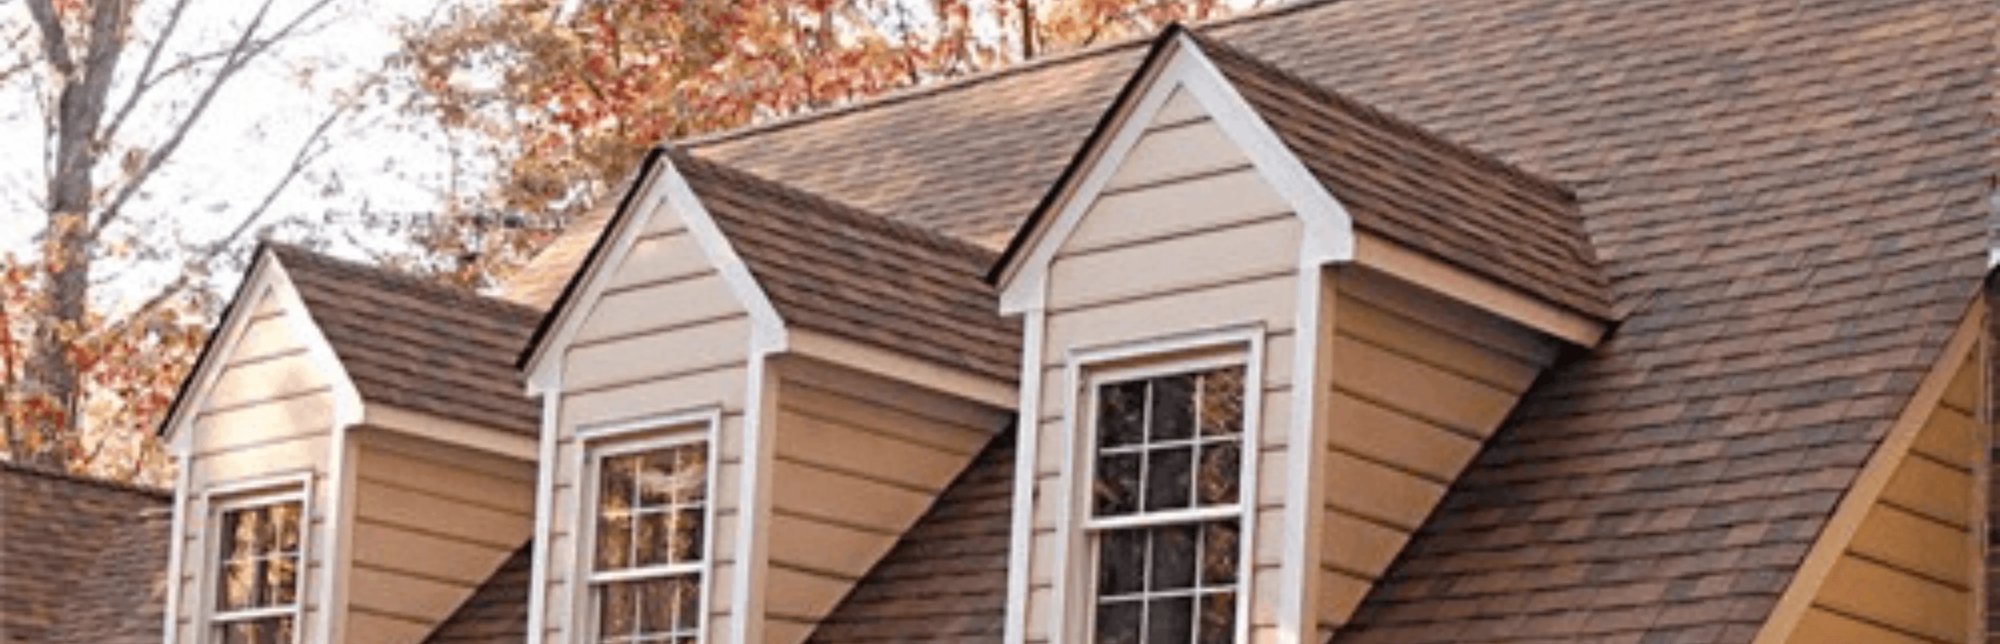 Roof with gables | Berkeley Exteriors